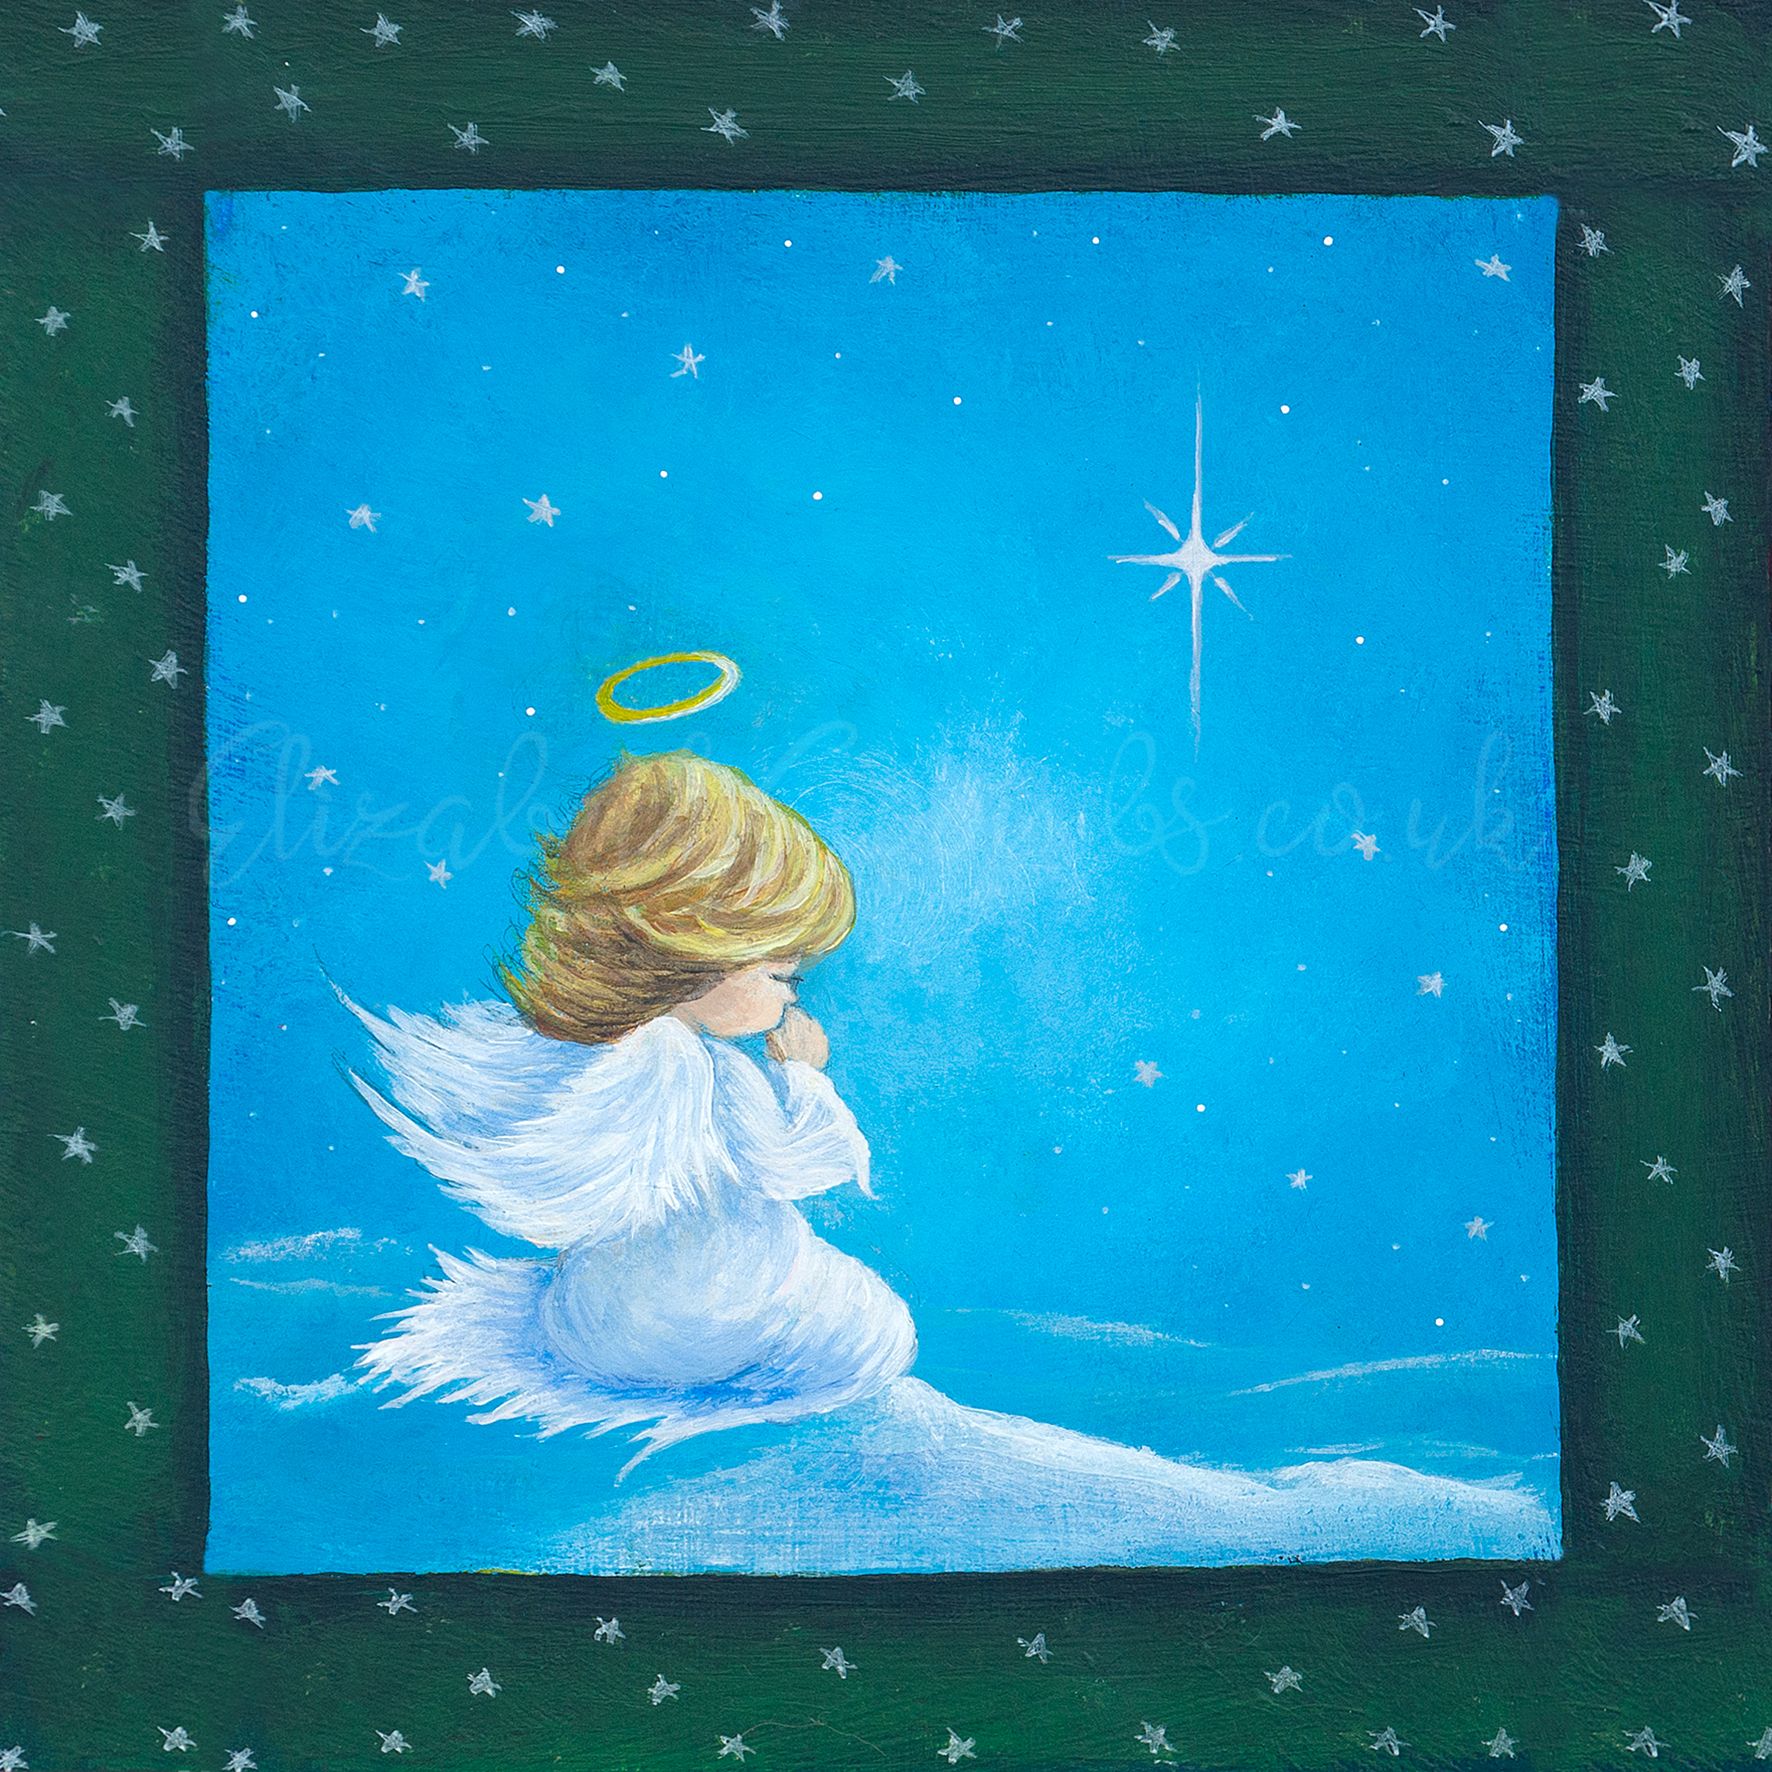 Previous product: Angel Christmas Card